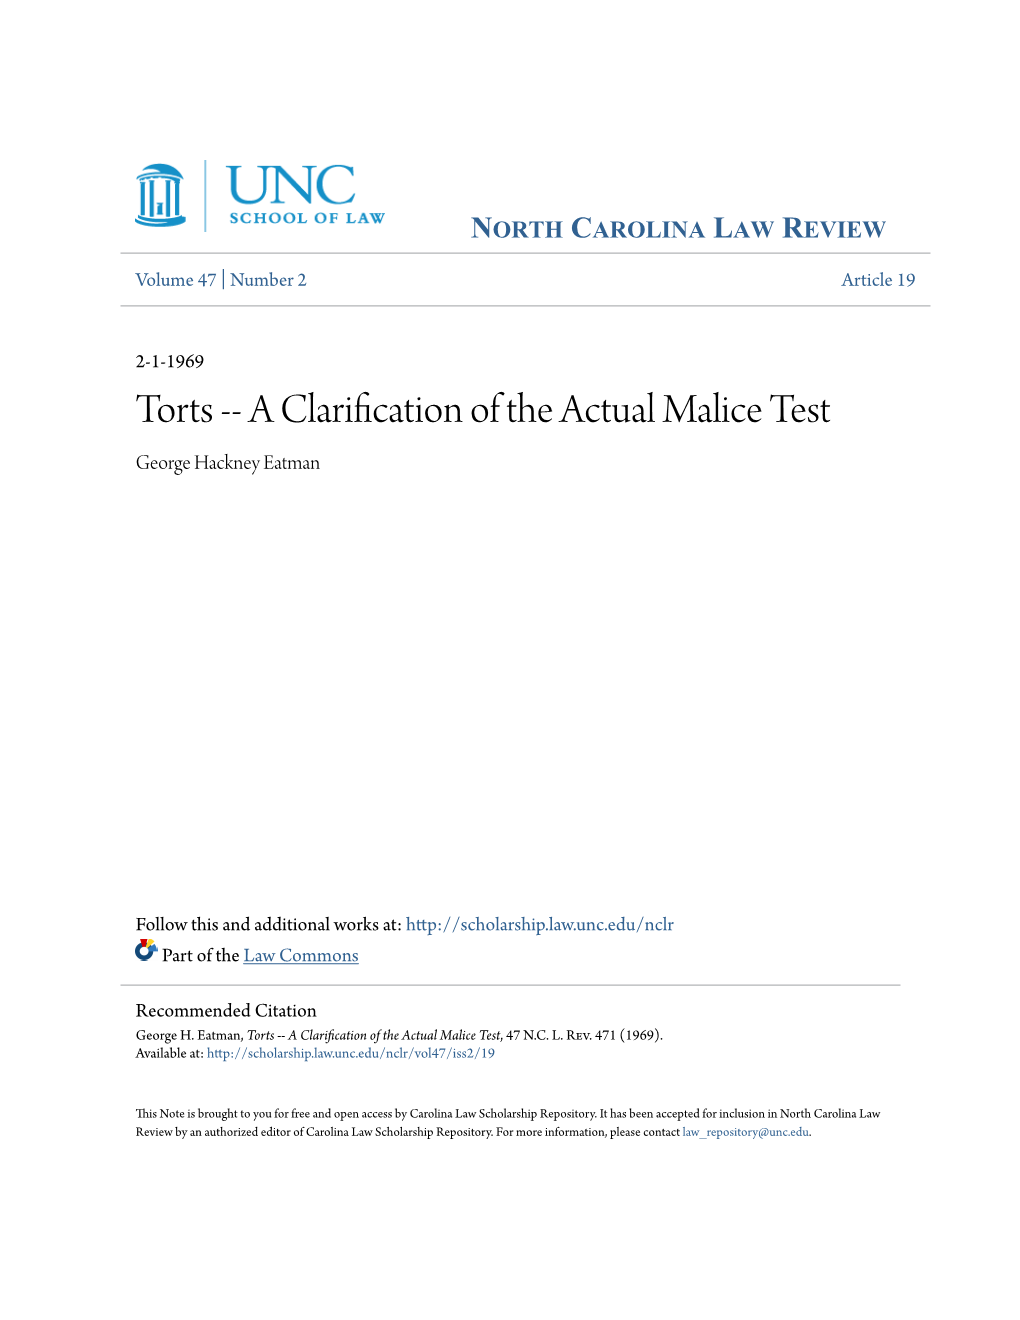 Torts -- a Clarification of the Actual Malice Test George Hackney Eatman